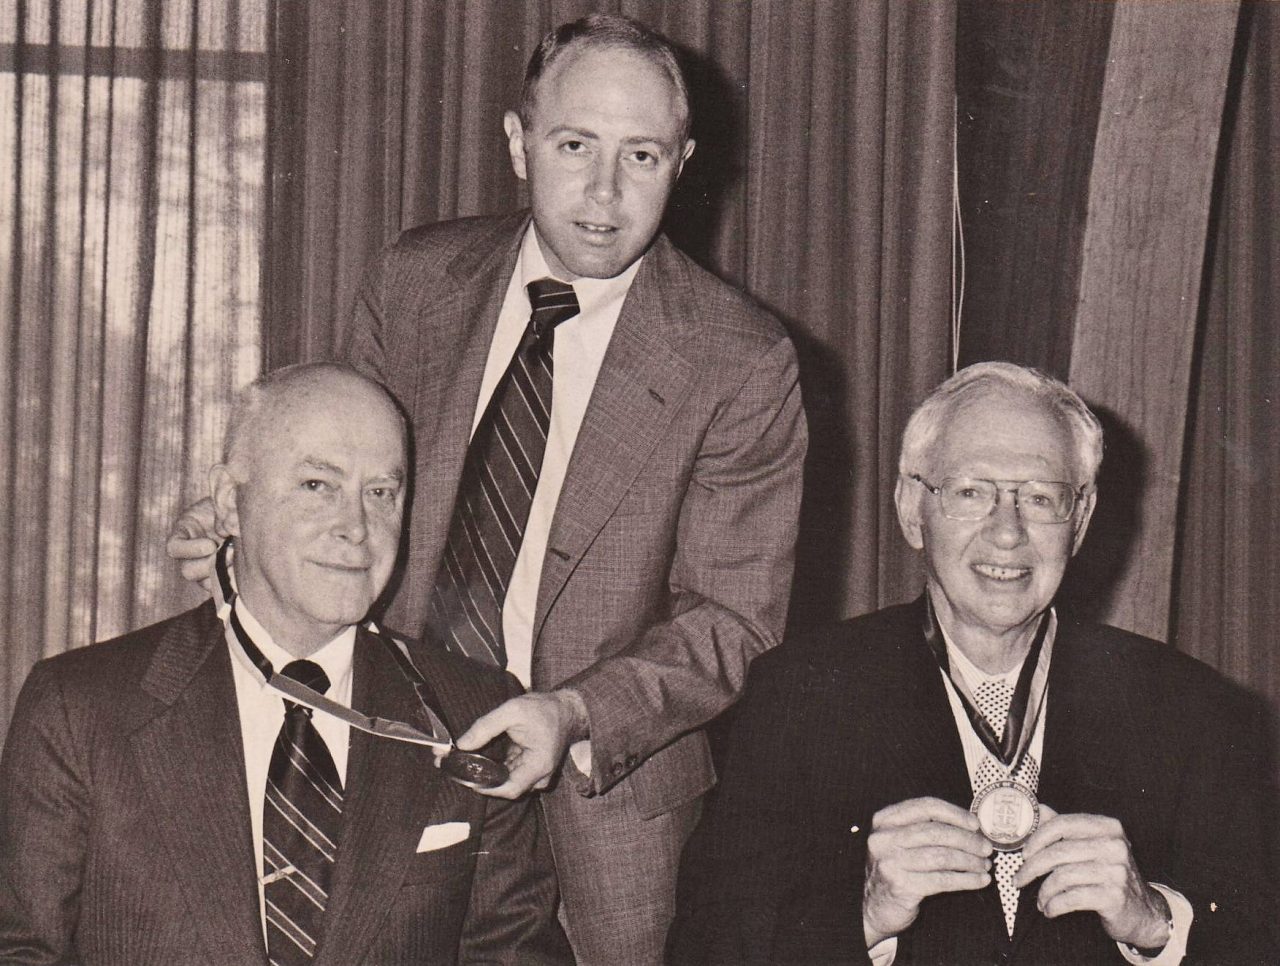 Man standing behind two individuals who are wearing an award medal around their necks.